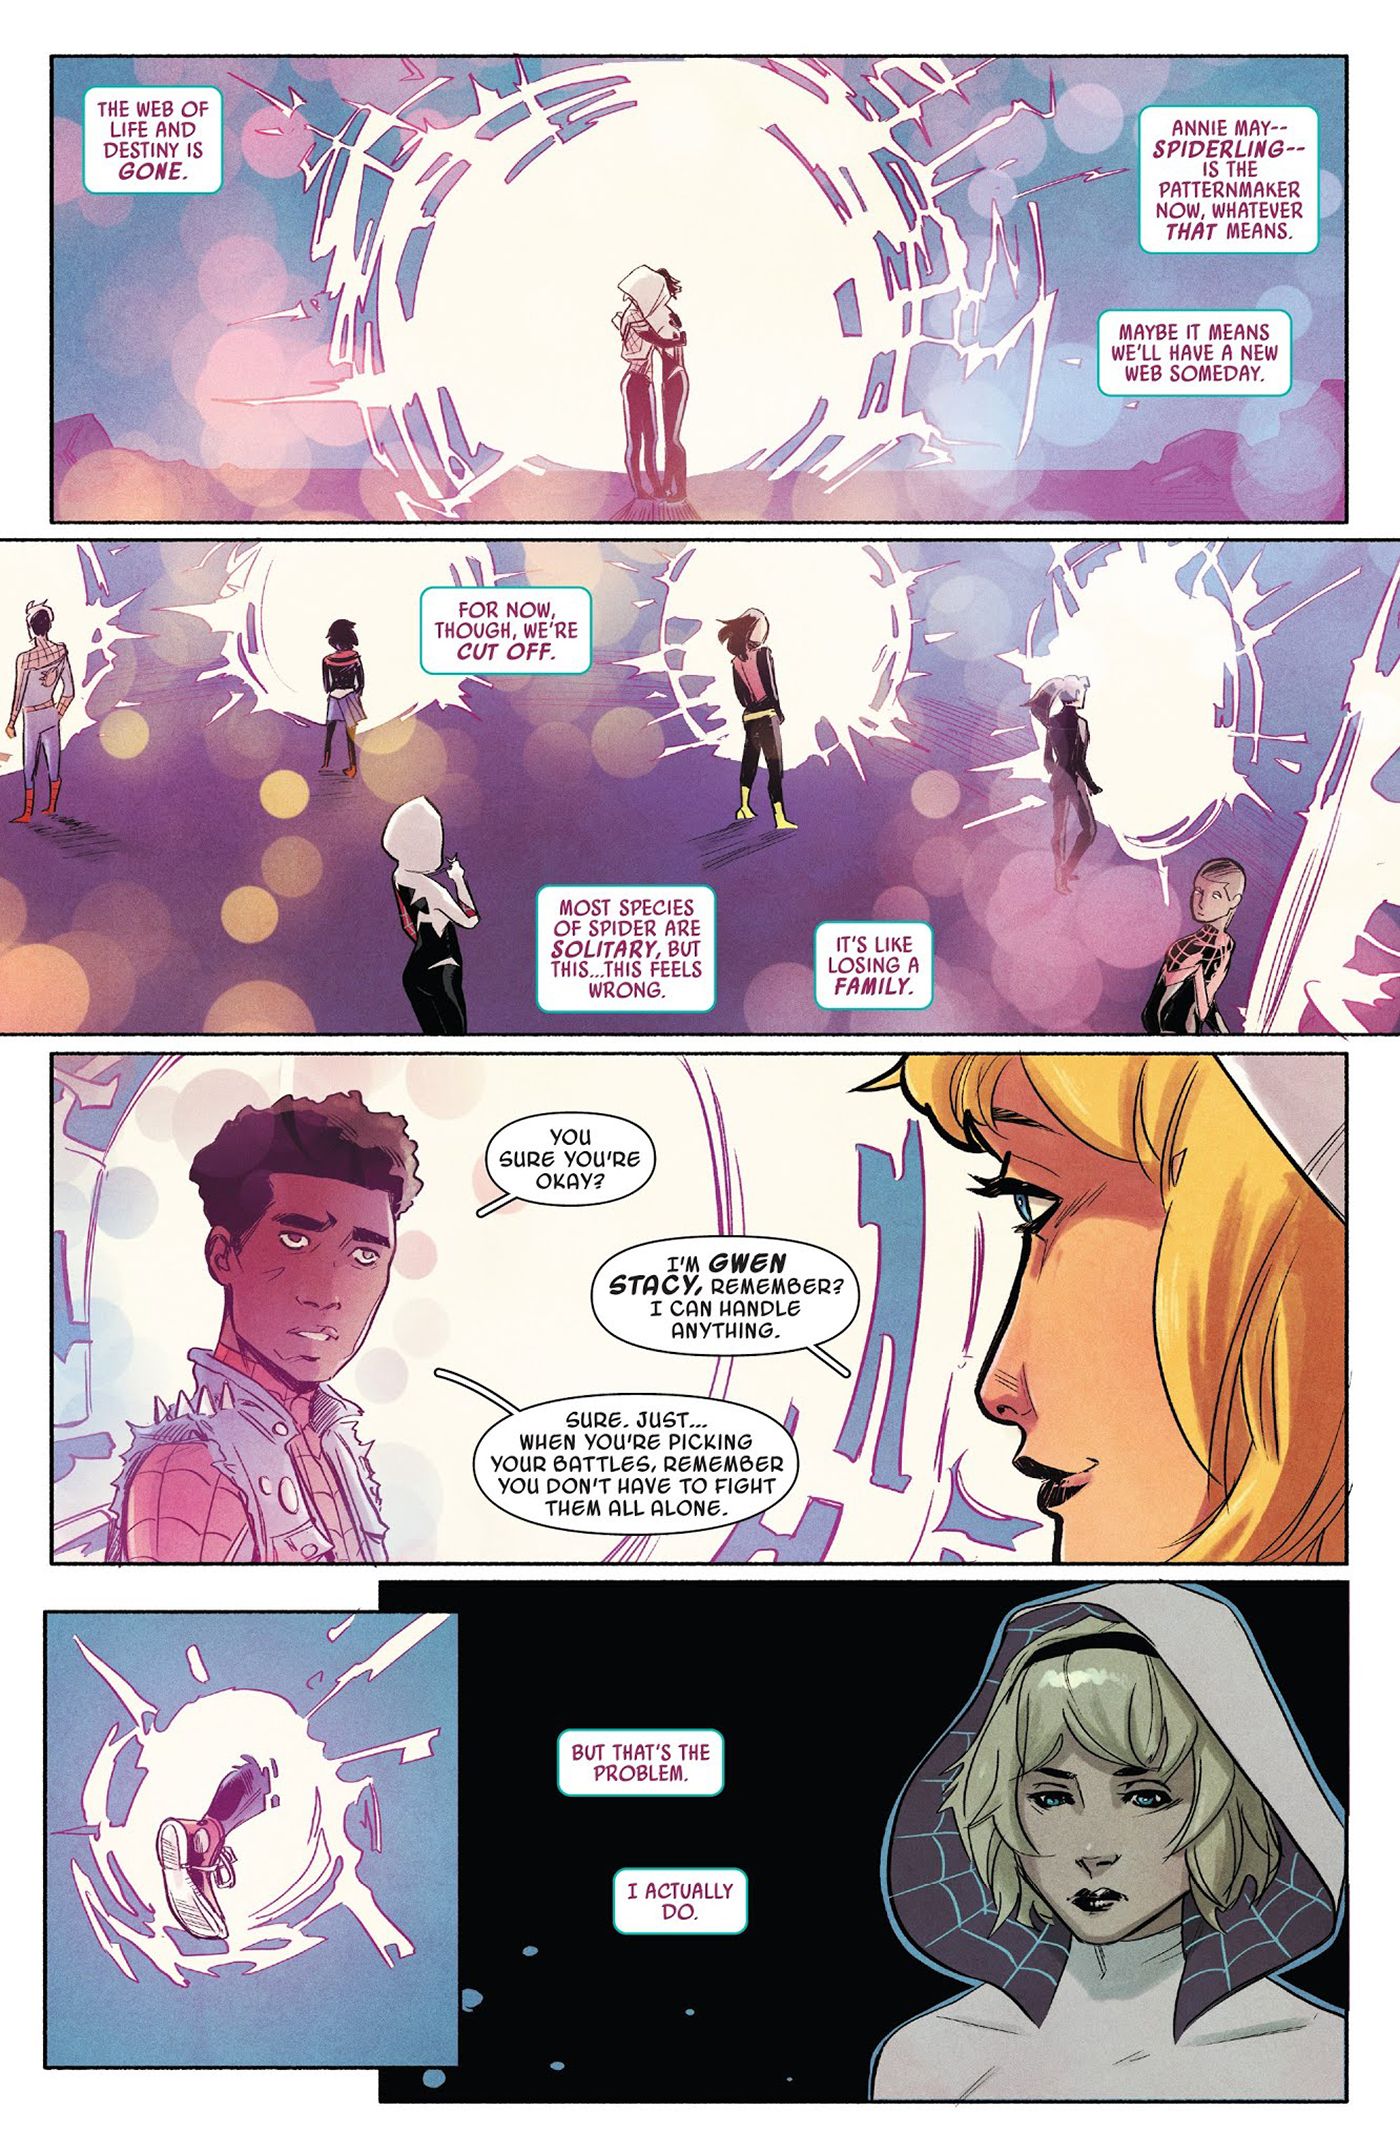 Spider-Gwen: Ghost Spider #4 - Gwen says goodbye to a multiverse of Spider-People, including Spider-Punk